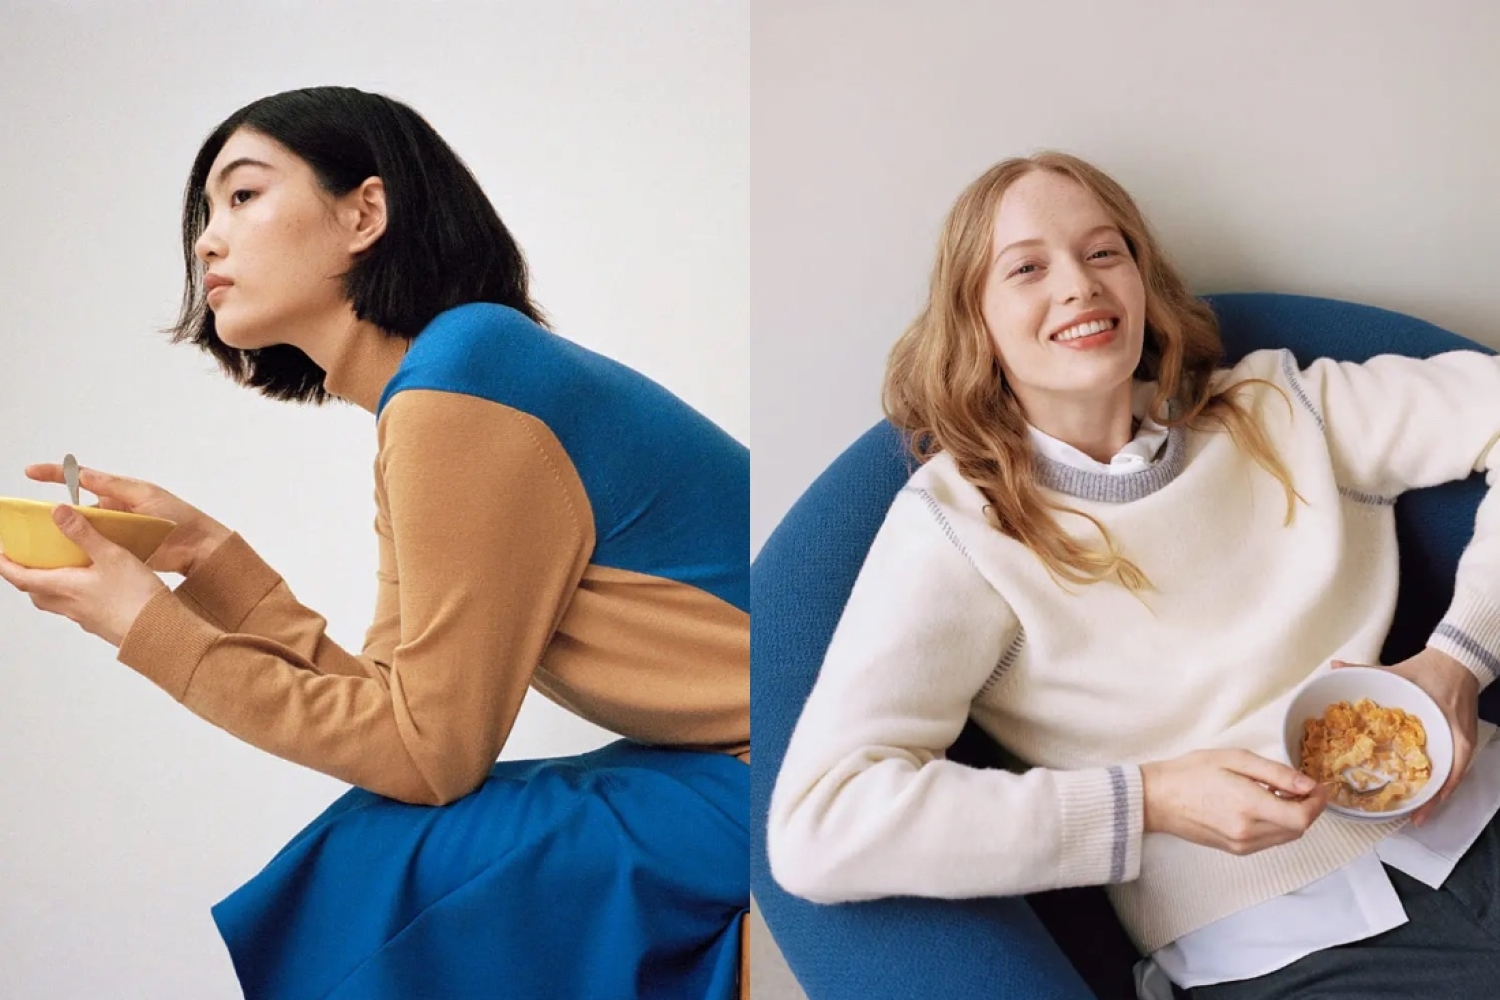 22FW UNIQLO and JW Anderson Fall/Winter Collection 